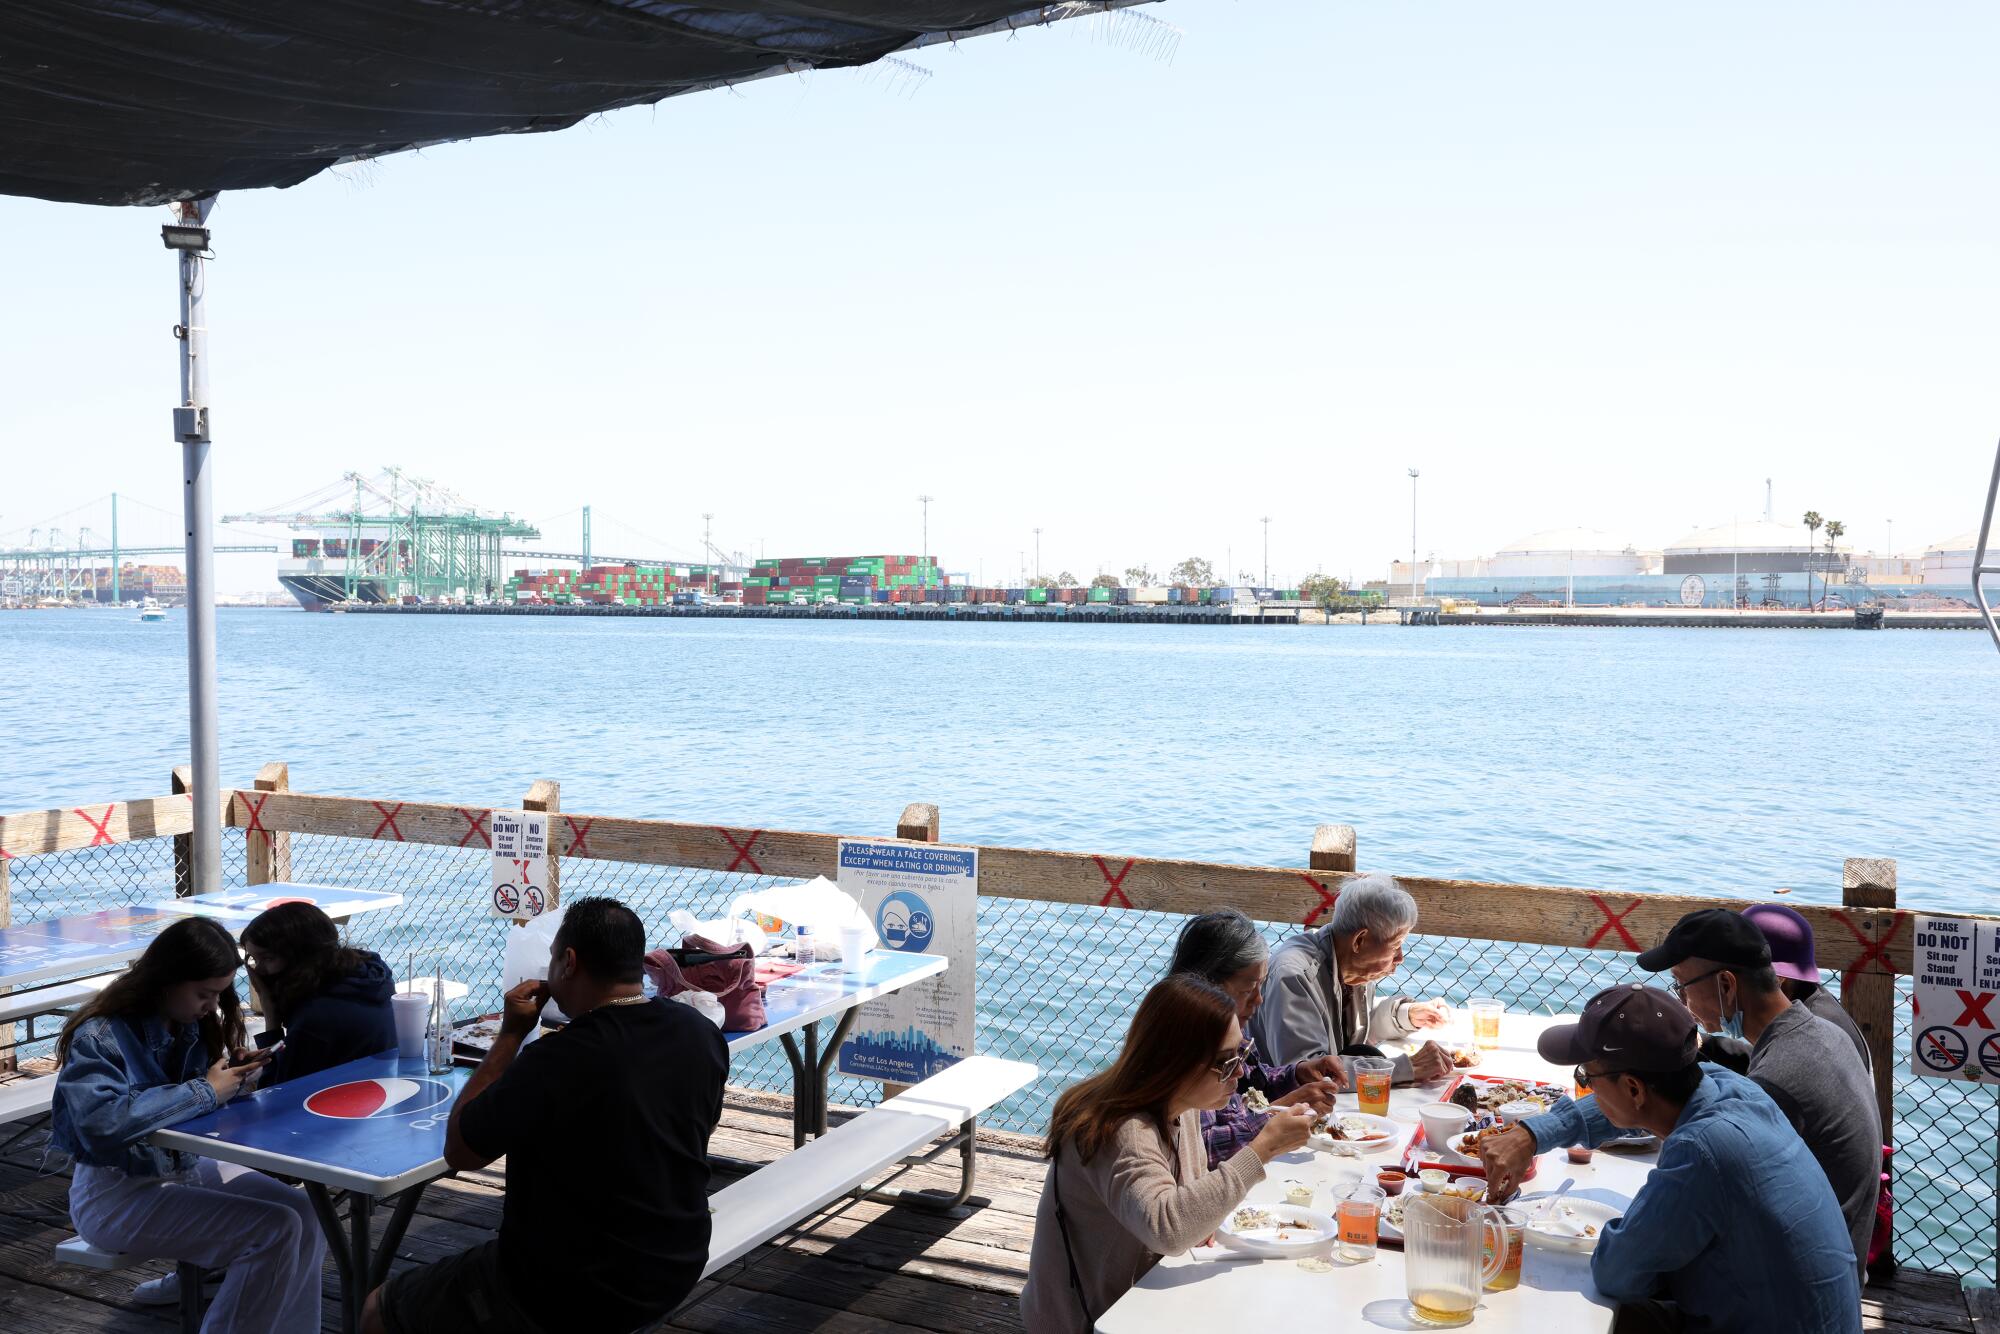 People eat on the dock at the San Pedro Fish Market.